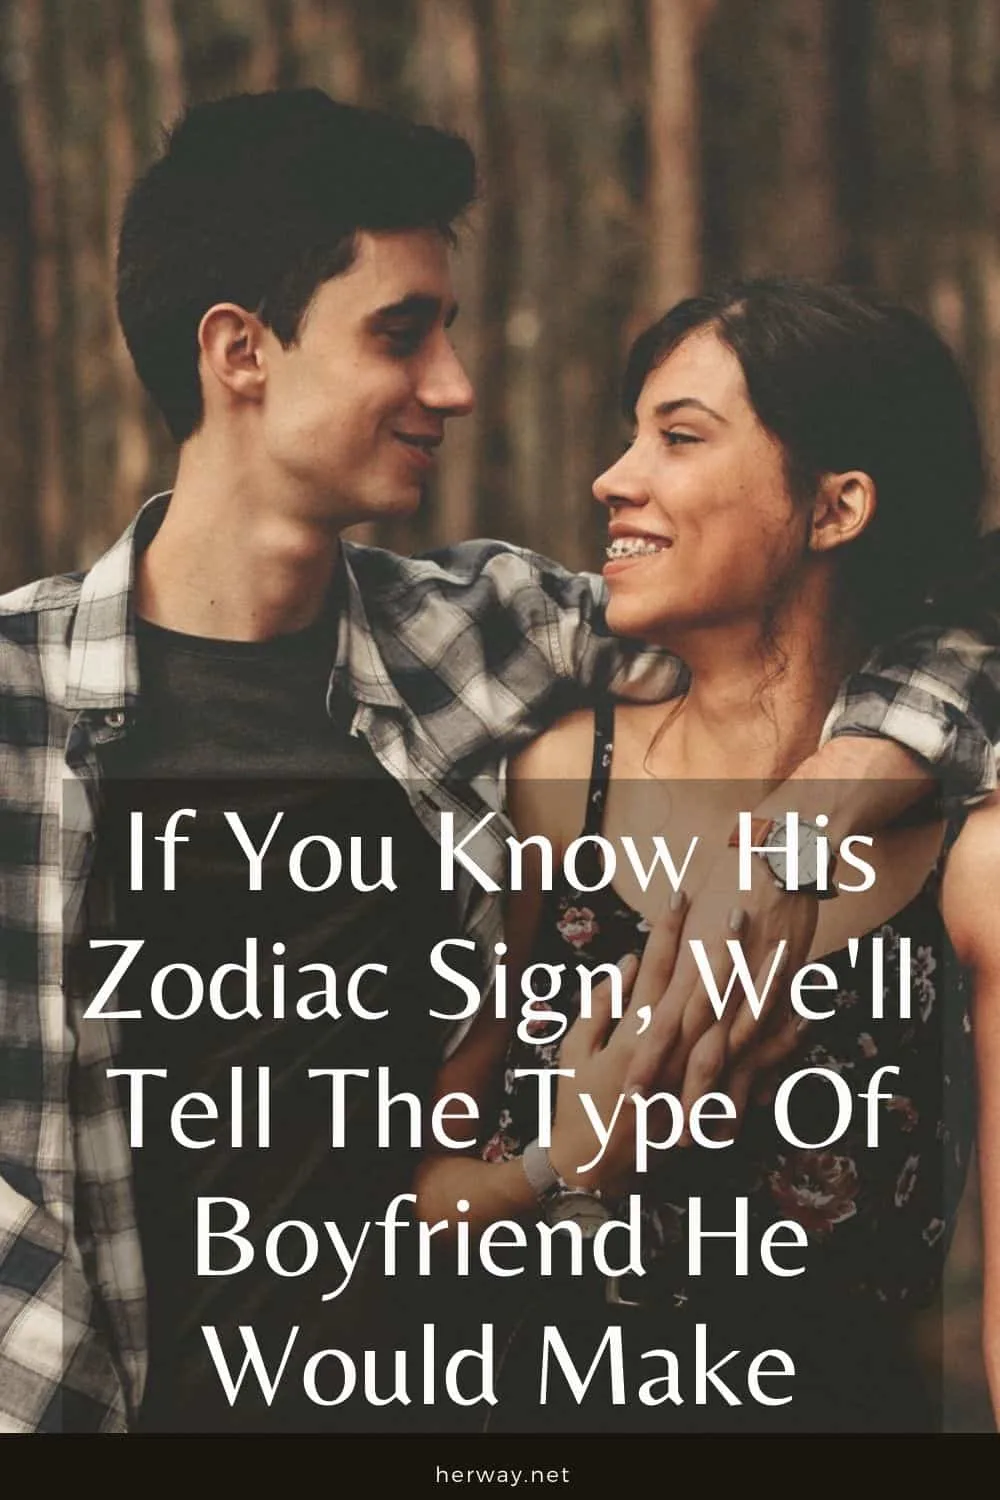 If You Know His Zodiac Sign, We'll Tell The Type Of Boyfriend He Would Make